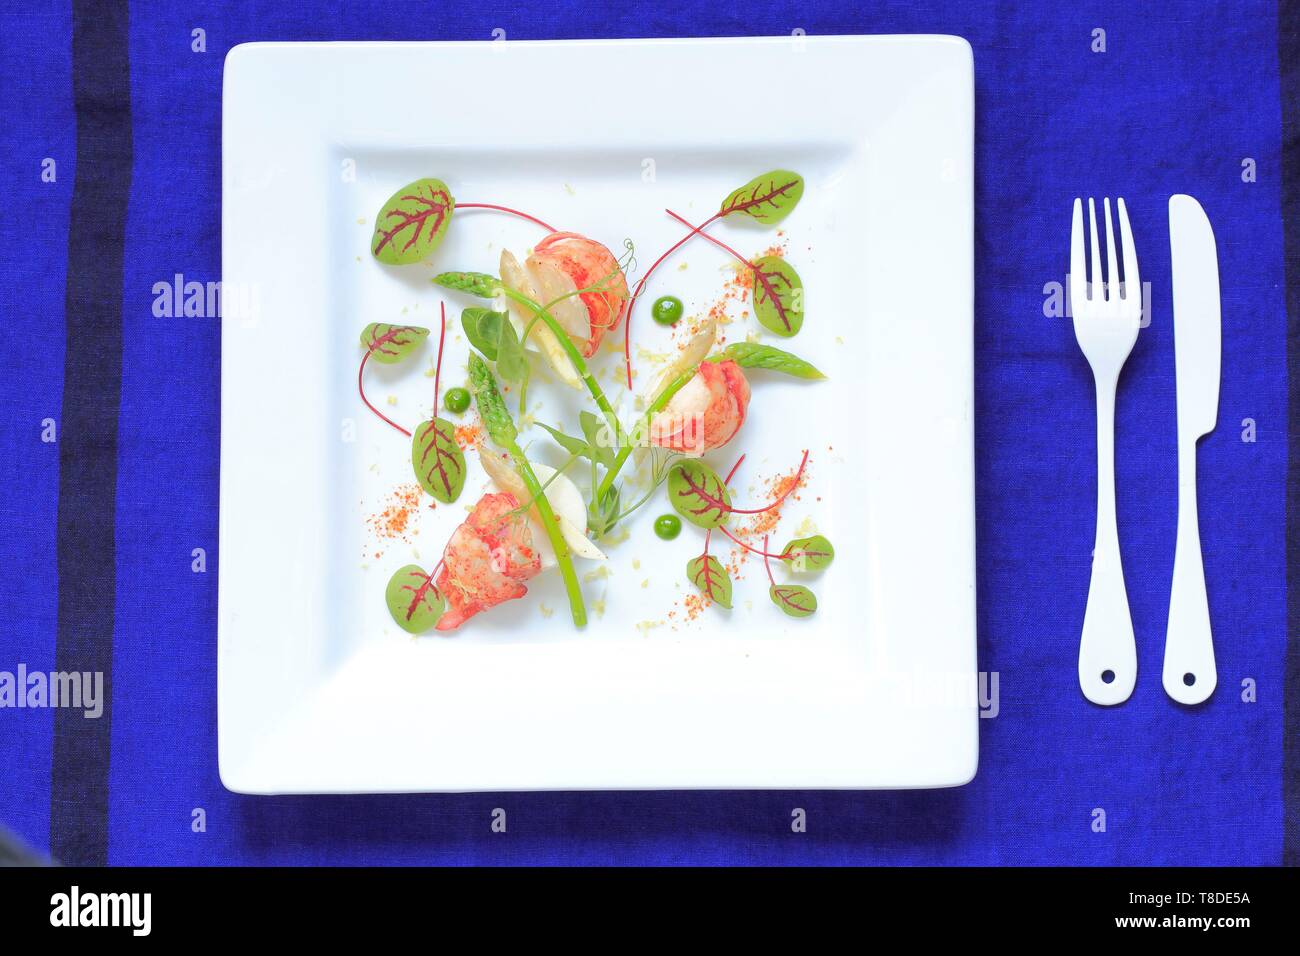 Canada, New Brunswick, Acadie, Moncton, Chef Pierre A. Richard's Little Louis Restaurant, Poached Lobster with Wild Asparagus and Beet Leaves Stock Photo